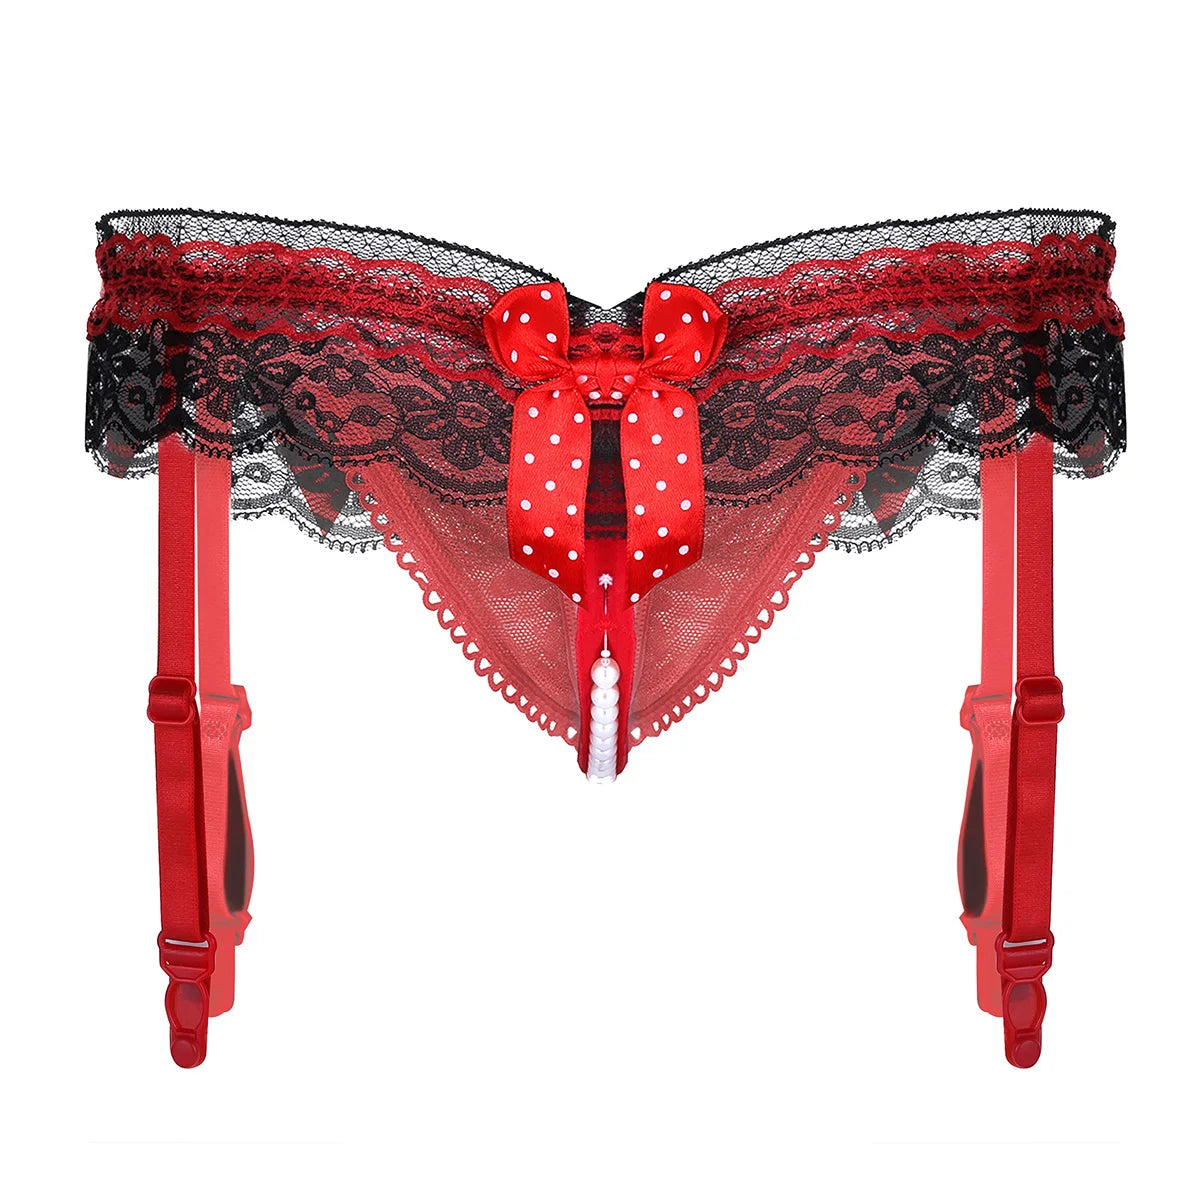 Sissy Lace Crotchless Panties - Lingerie - Twisted Jezebel